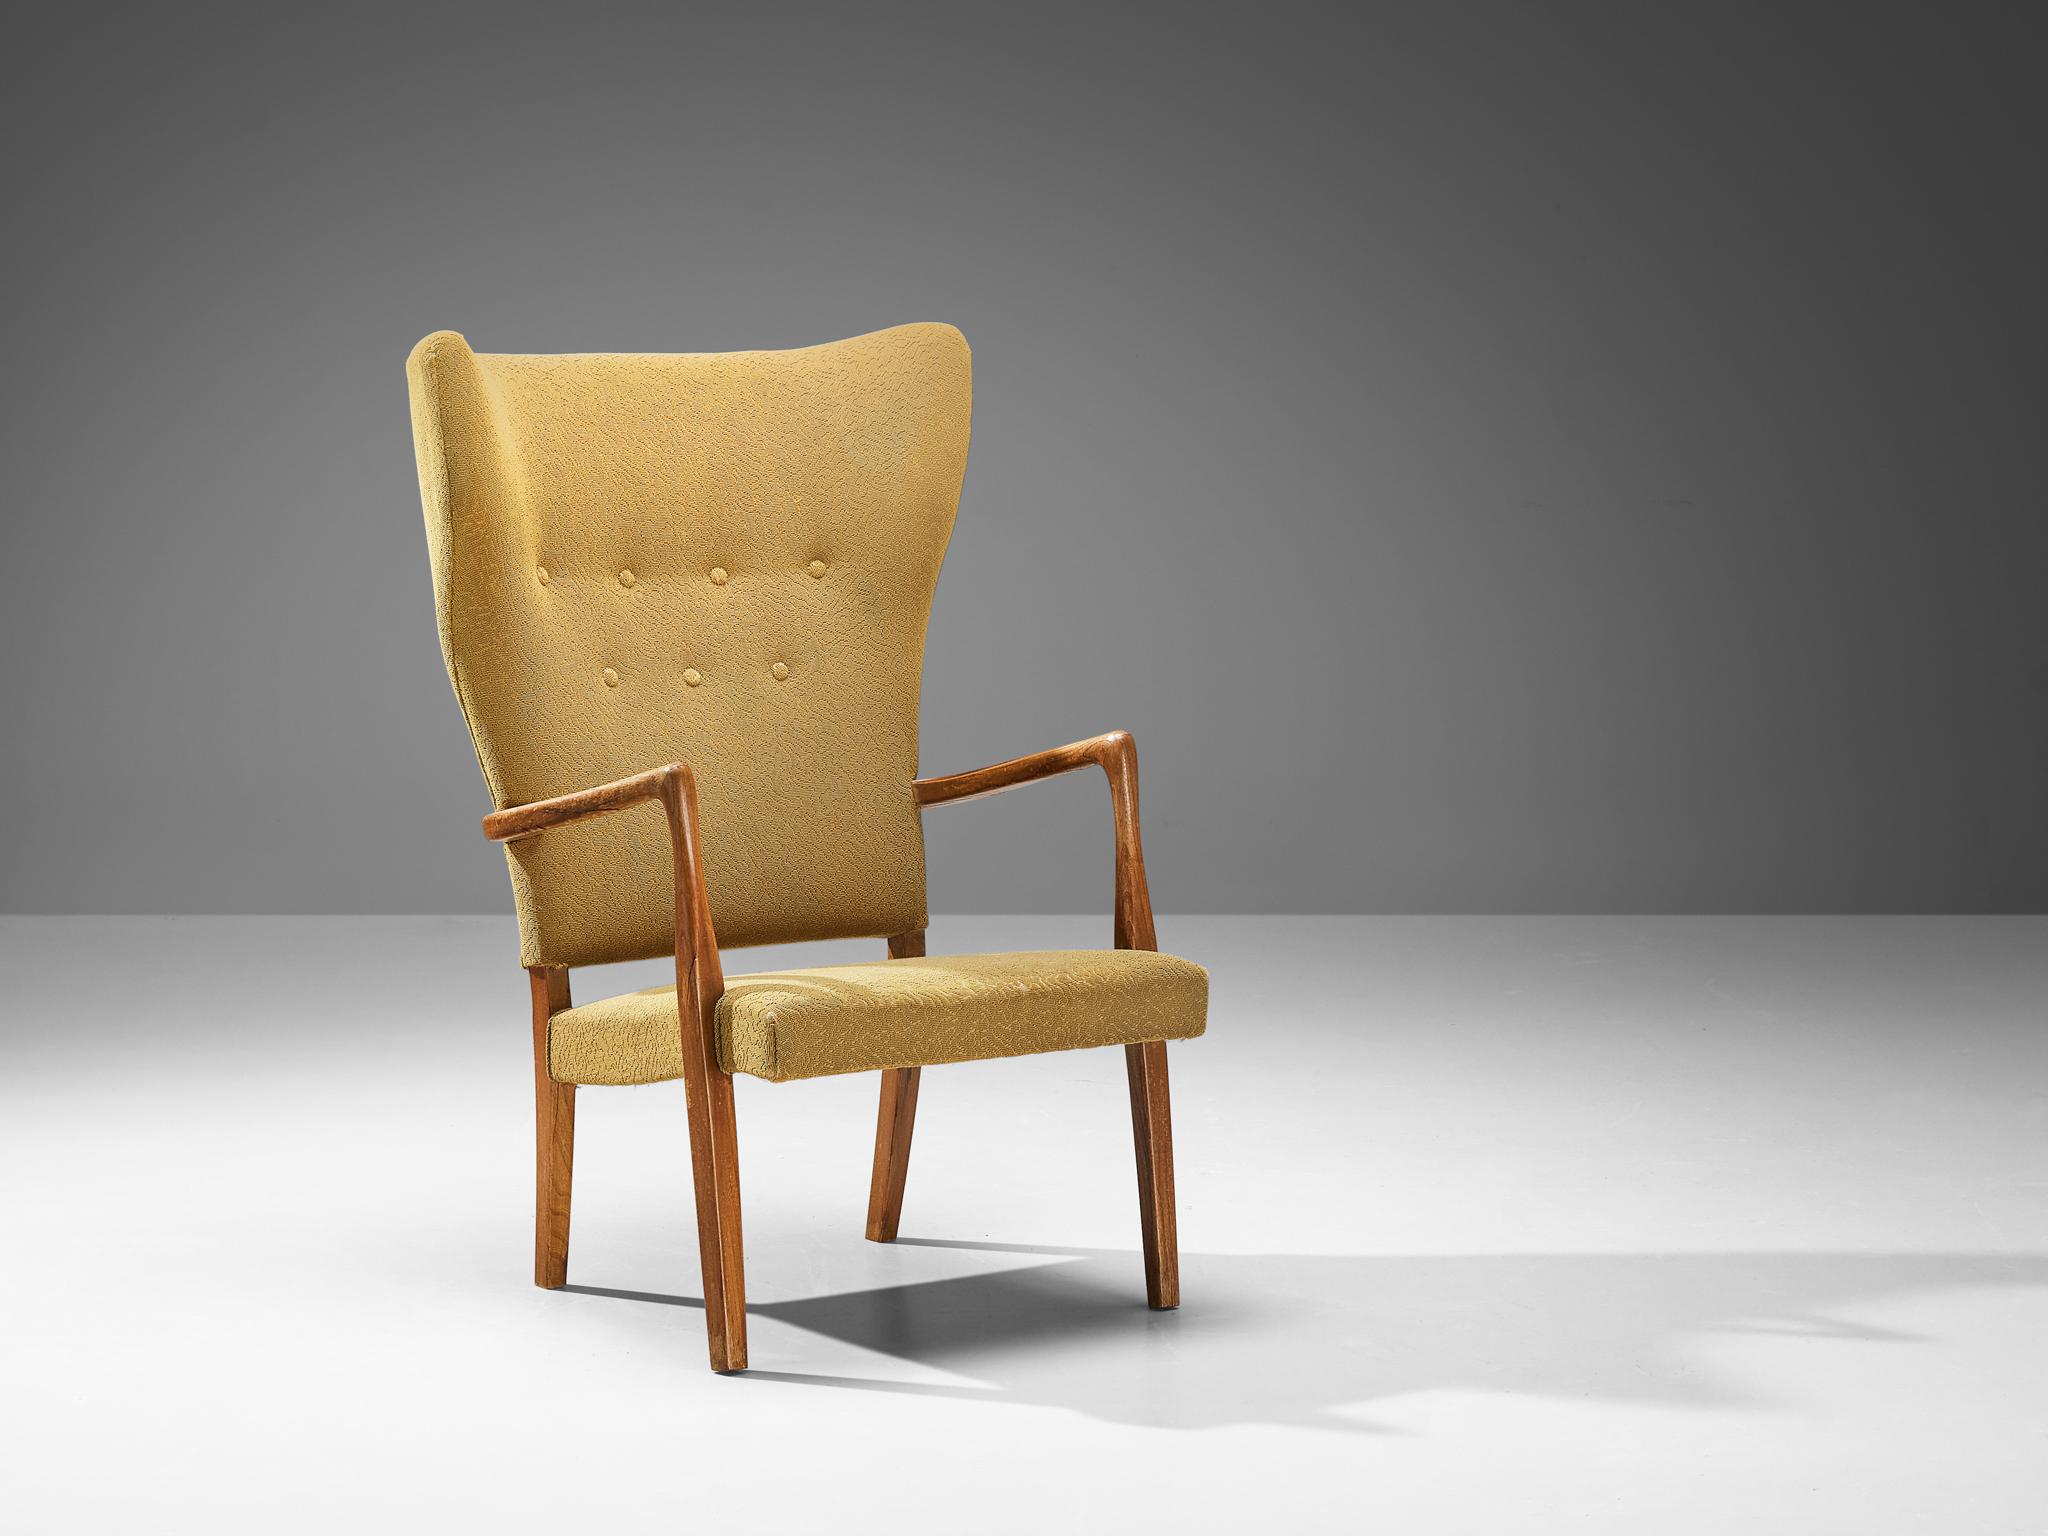 Armchair, fabric, teak, Denmark, 1950s

This stately and extremely well-executed wingback chair shows an exquisite level of craftsmanship. The lines and finishes in this chair from 1950 are curvy yet crisp. The teak frame shows traits of the